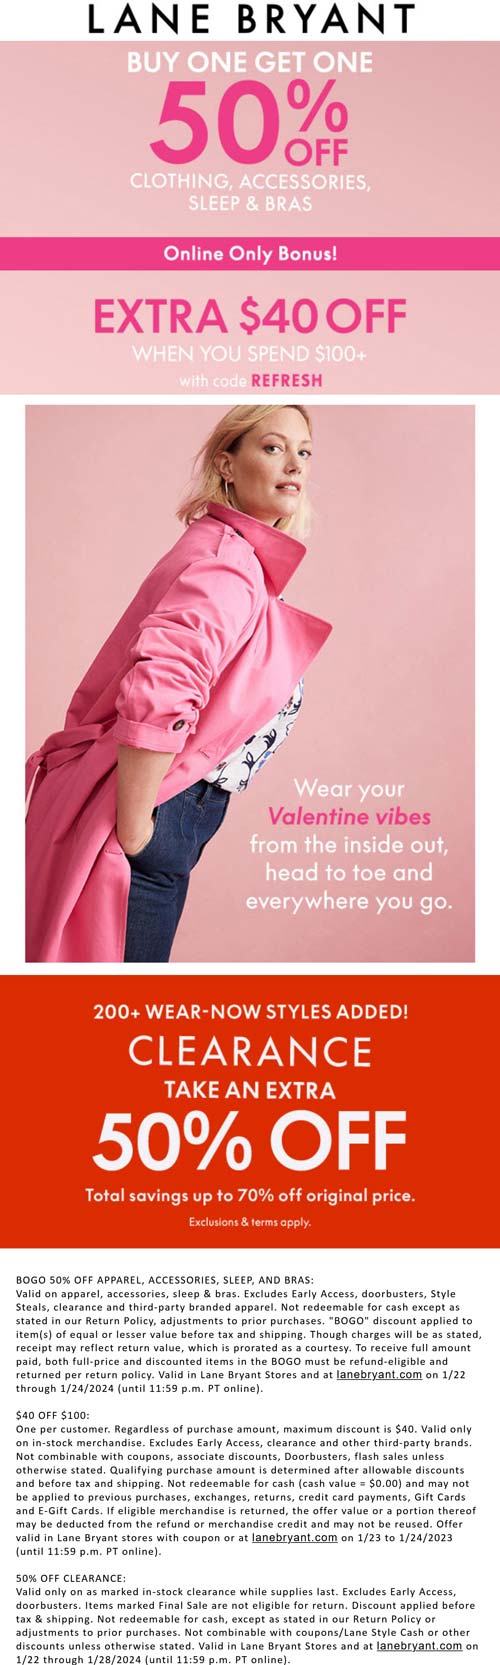 Lane Bryant stores Coupon  $40 off $100 + extra 50% off clearance & more at Lane Bryant via promo code REFRESH #lanebryant 